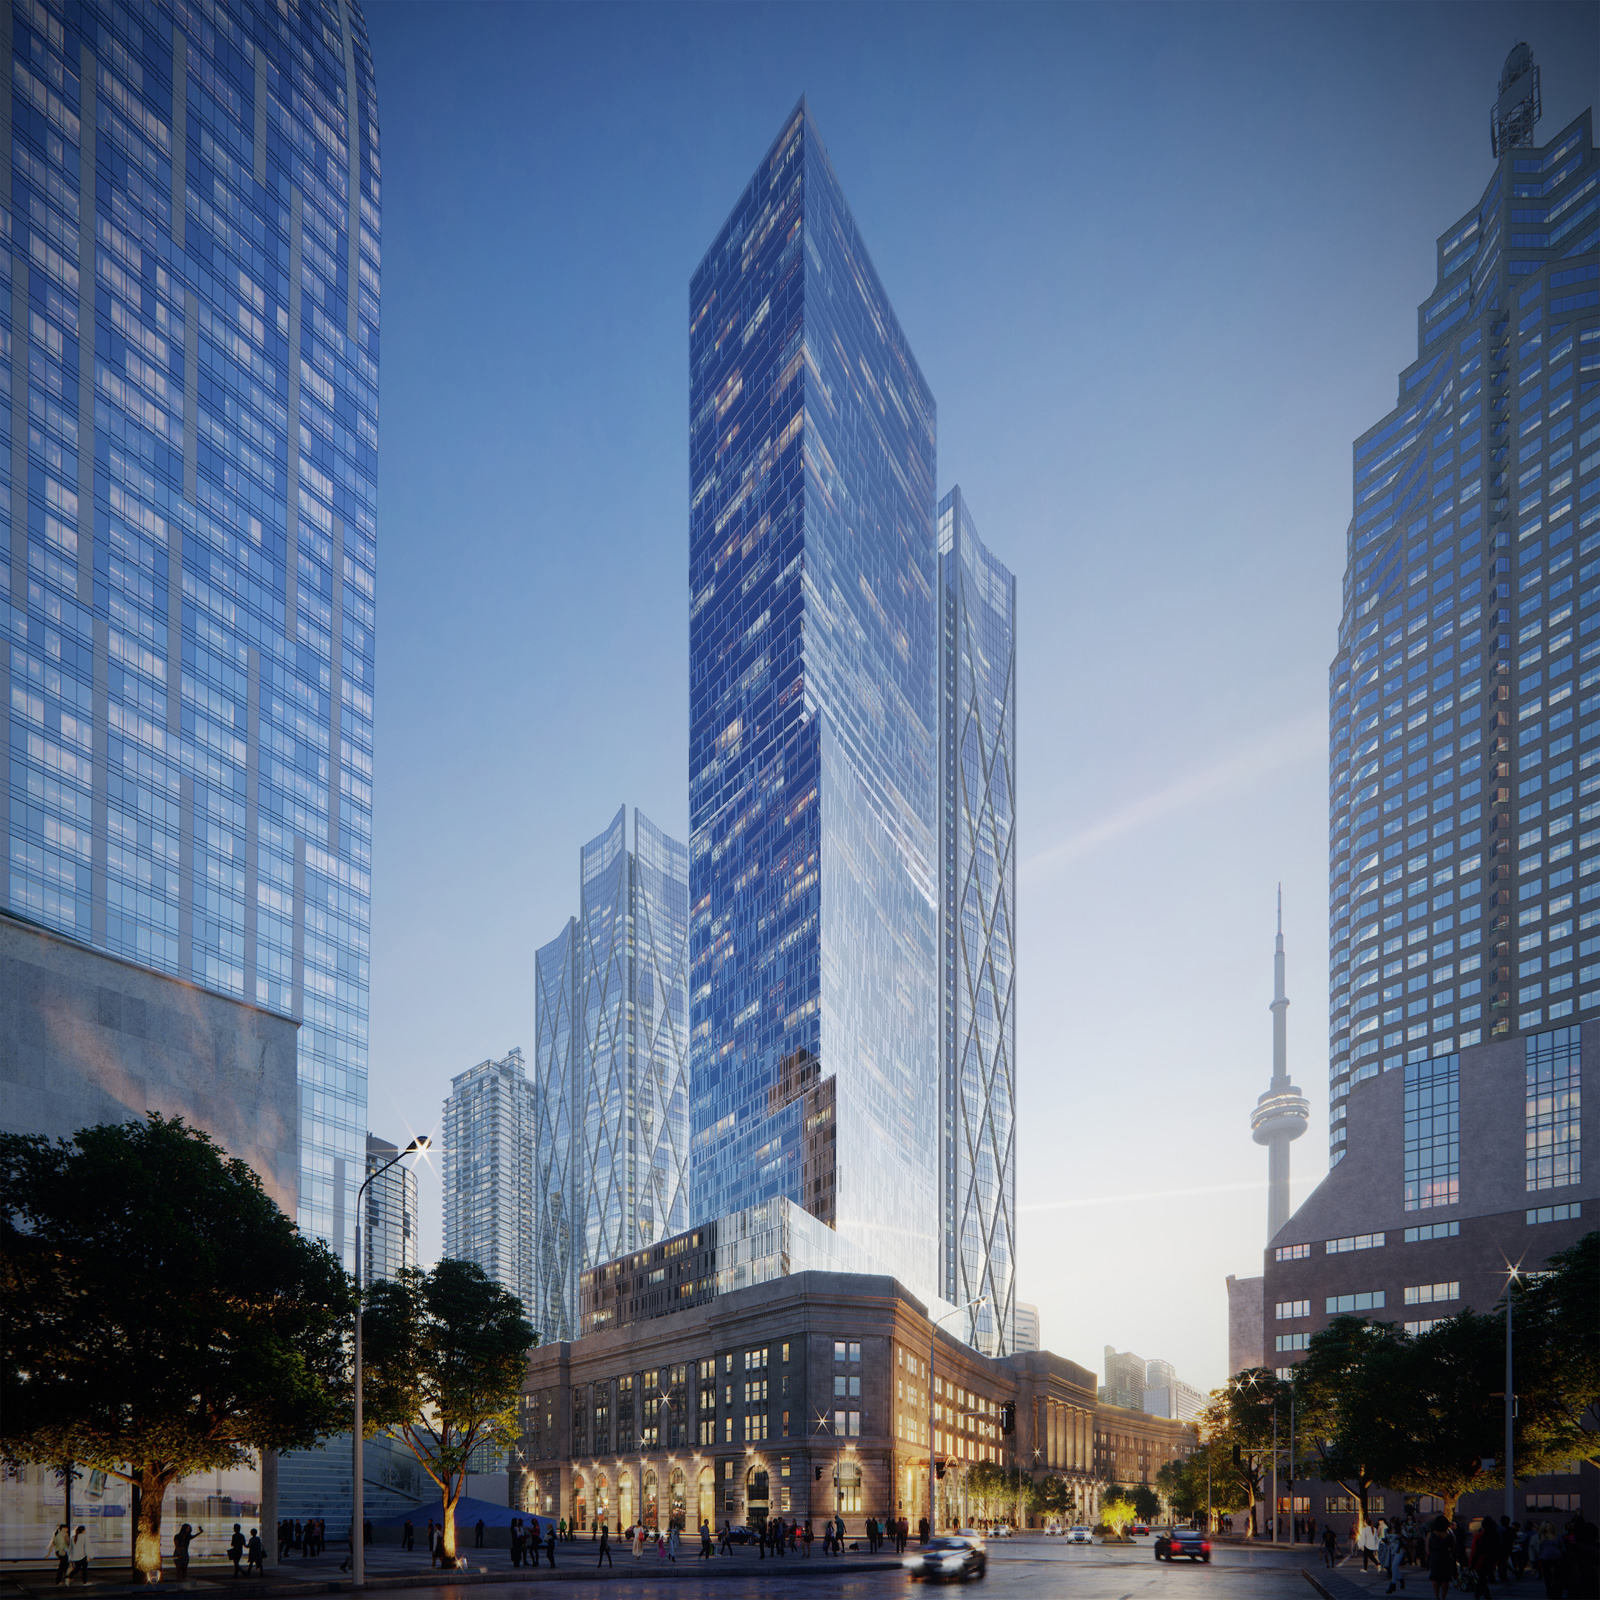 Photorealistic 3D exterior render of a skyscraper adjacent to the historic building at it’s base in the evening hours with Toronto’s CN tower visible in the background